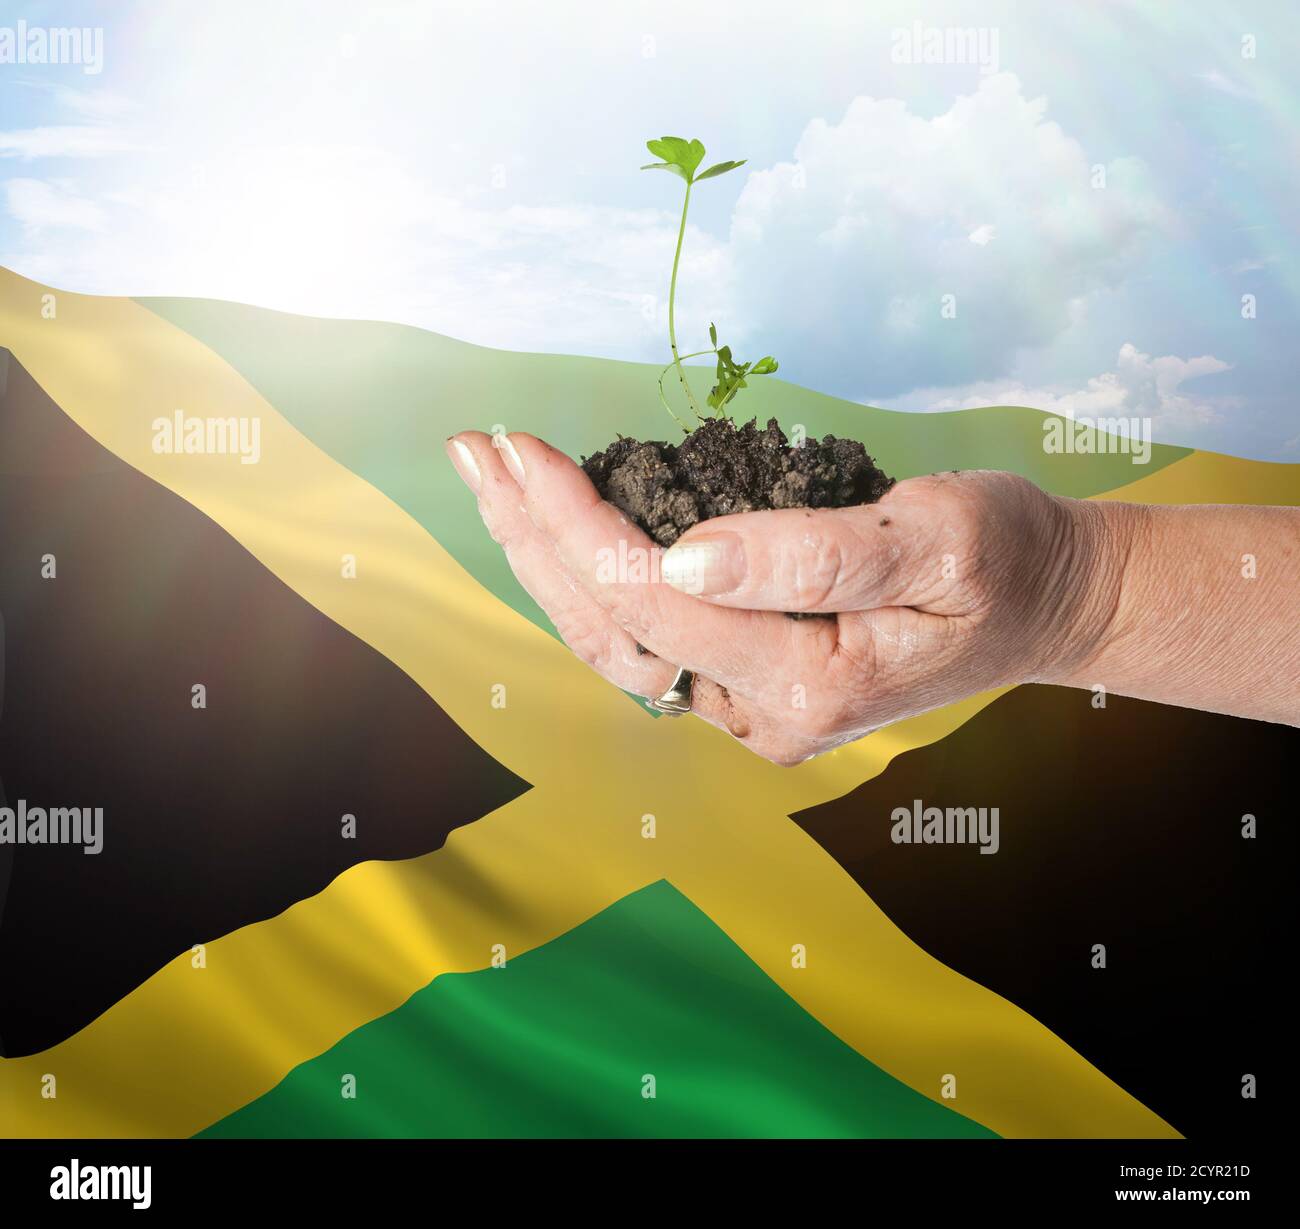 Jamaica growth and new beginning. Green renewable energy and ecology concept. Hand holding young plant. Stock Photo